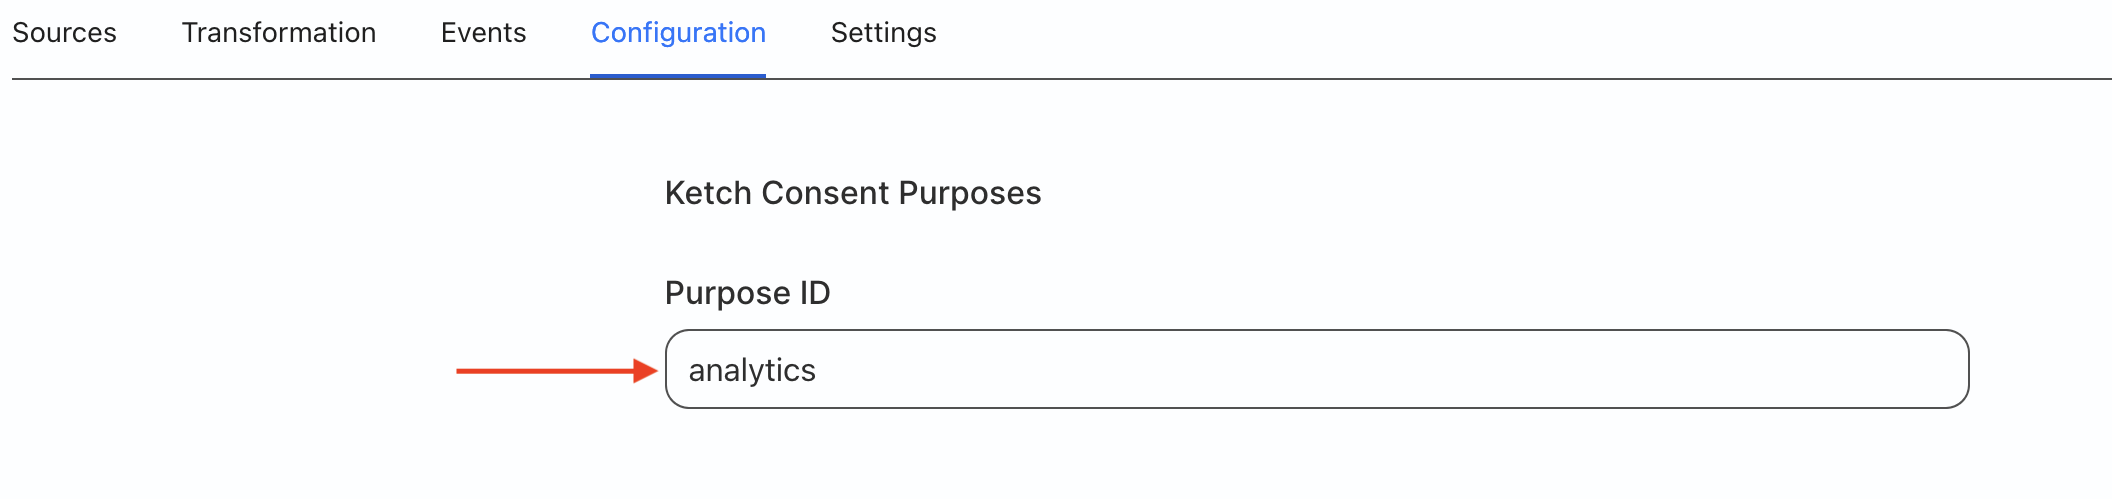 Ketch consent mapping in RudderStack dashboard